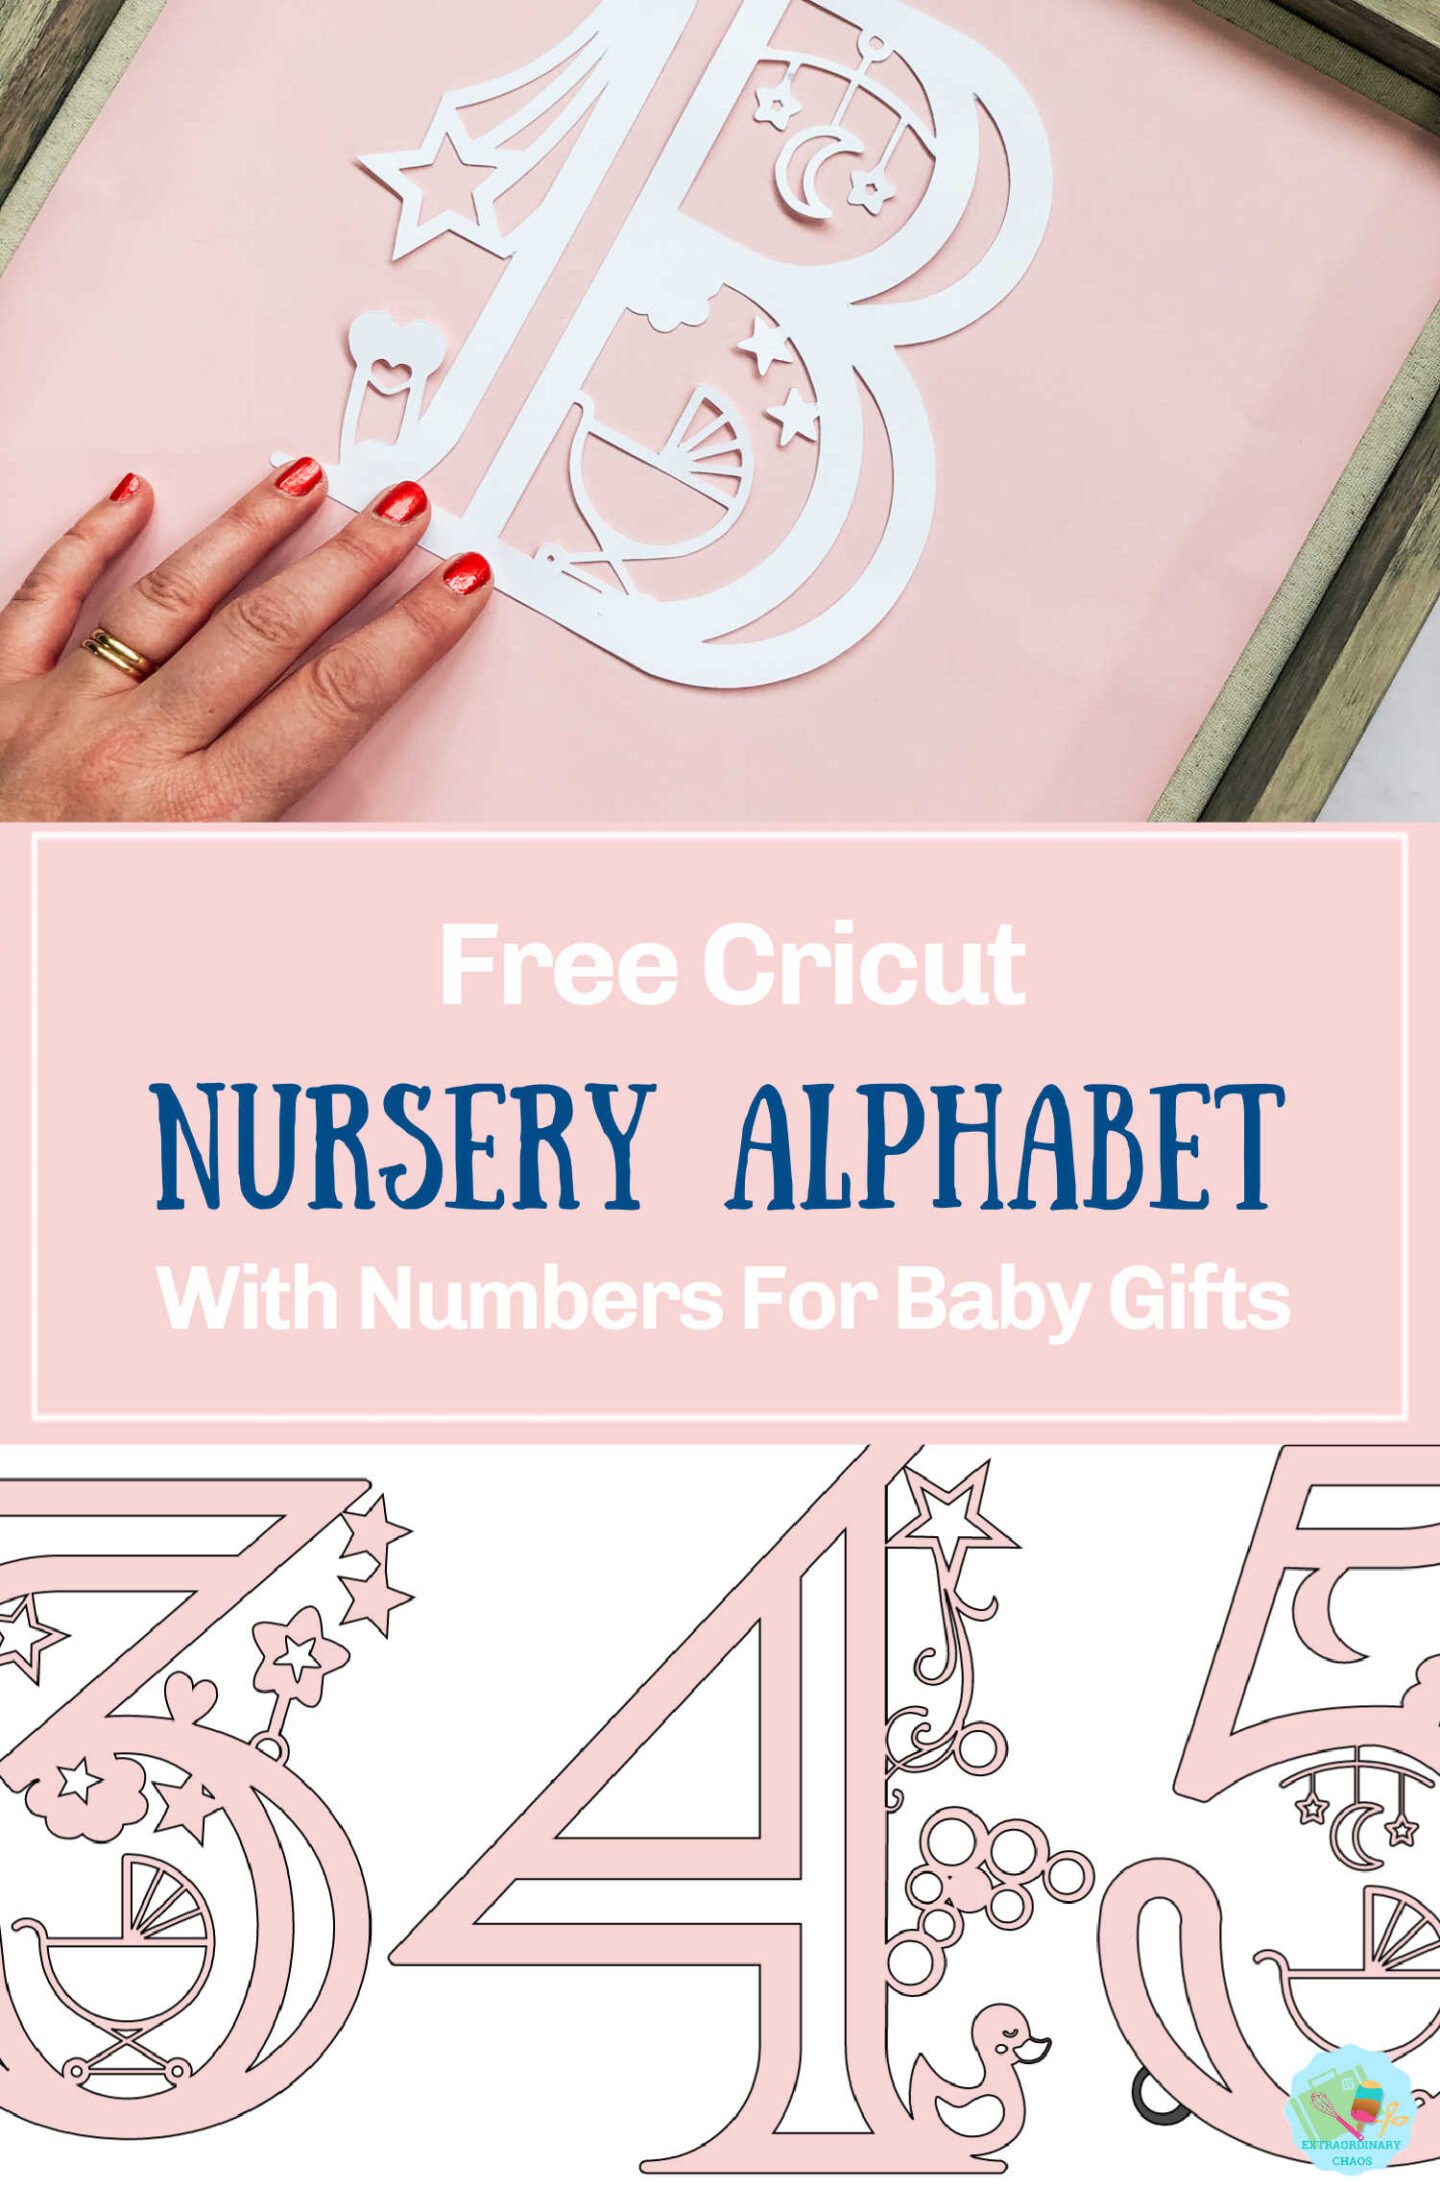 Free Cricut Baby Alphabet With Numbers For Baby Showers and nursery decor-2